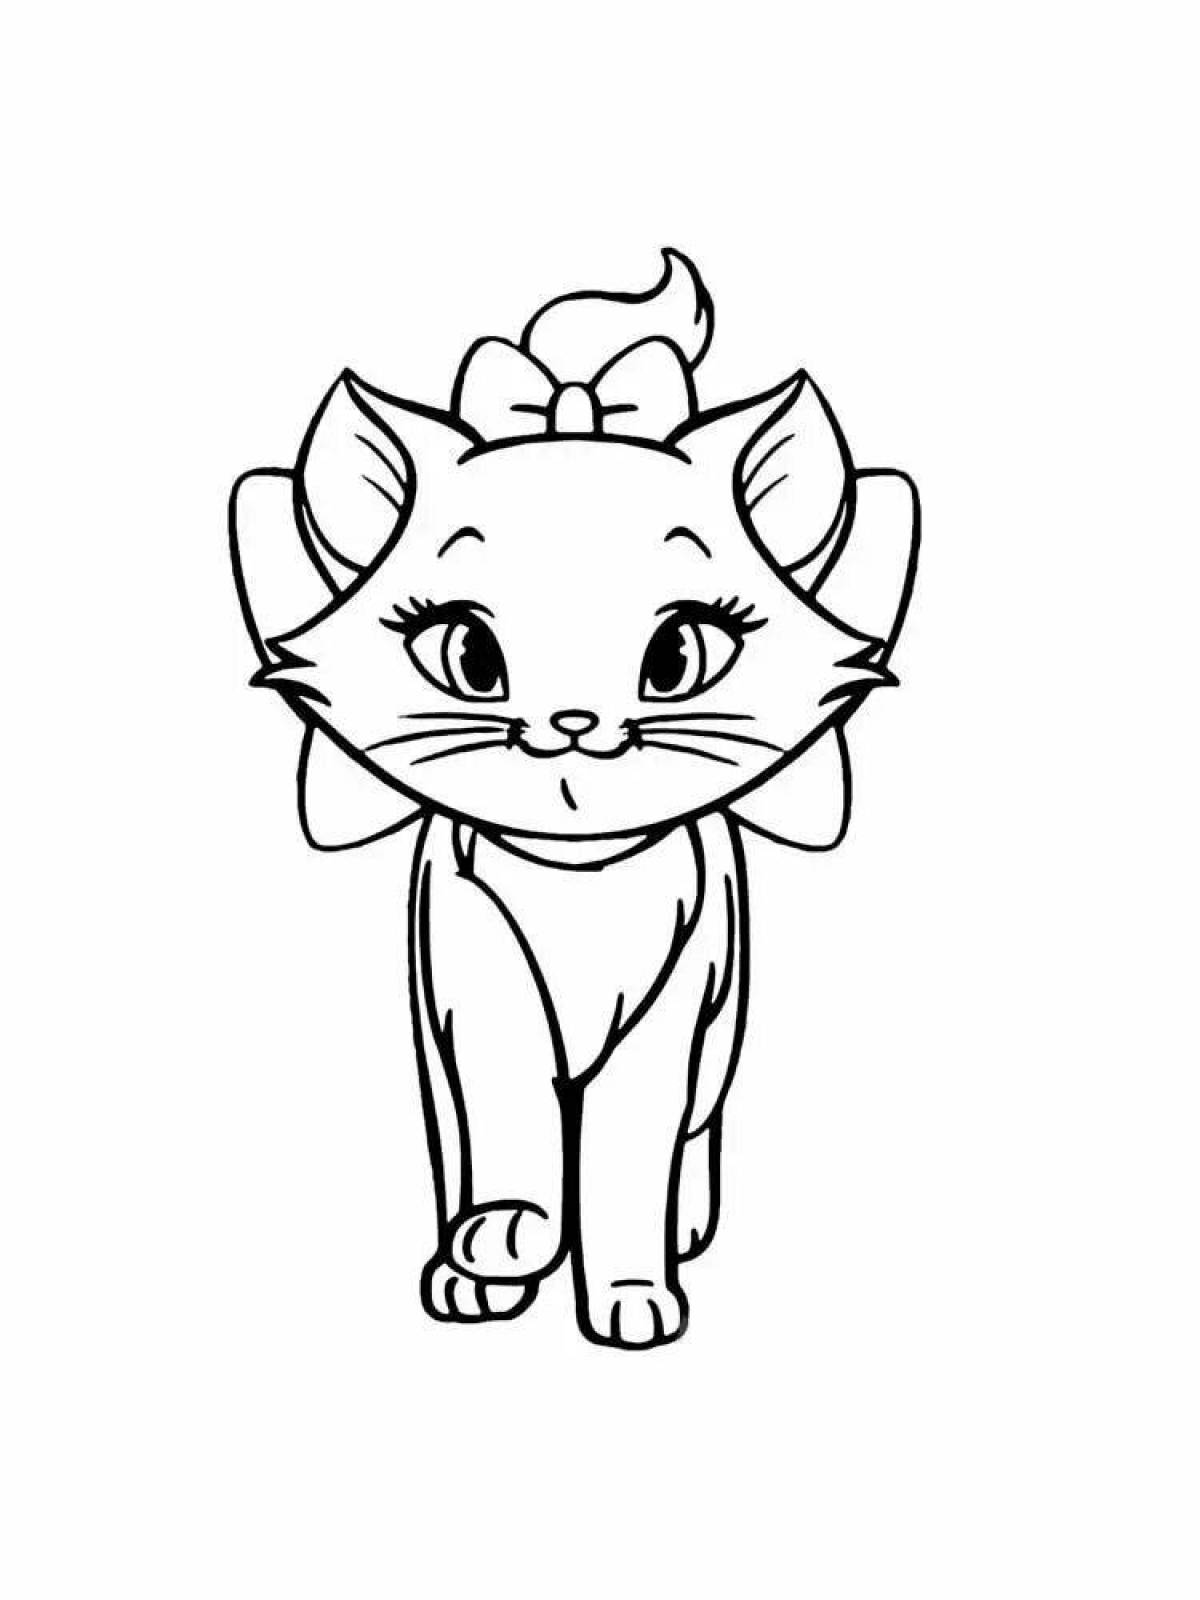 Coloring page graceful cat with a bow